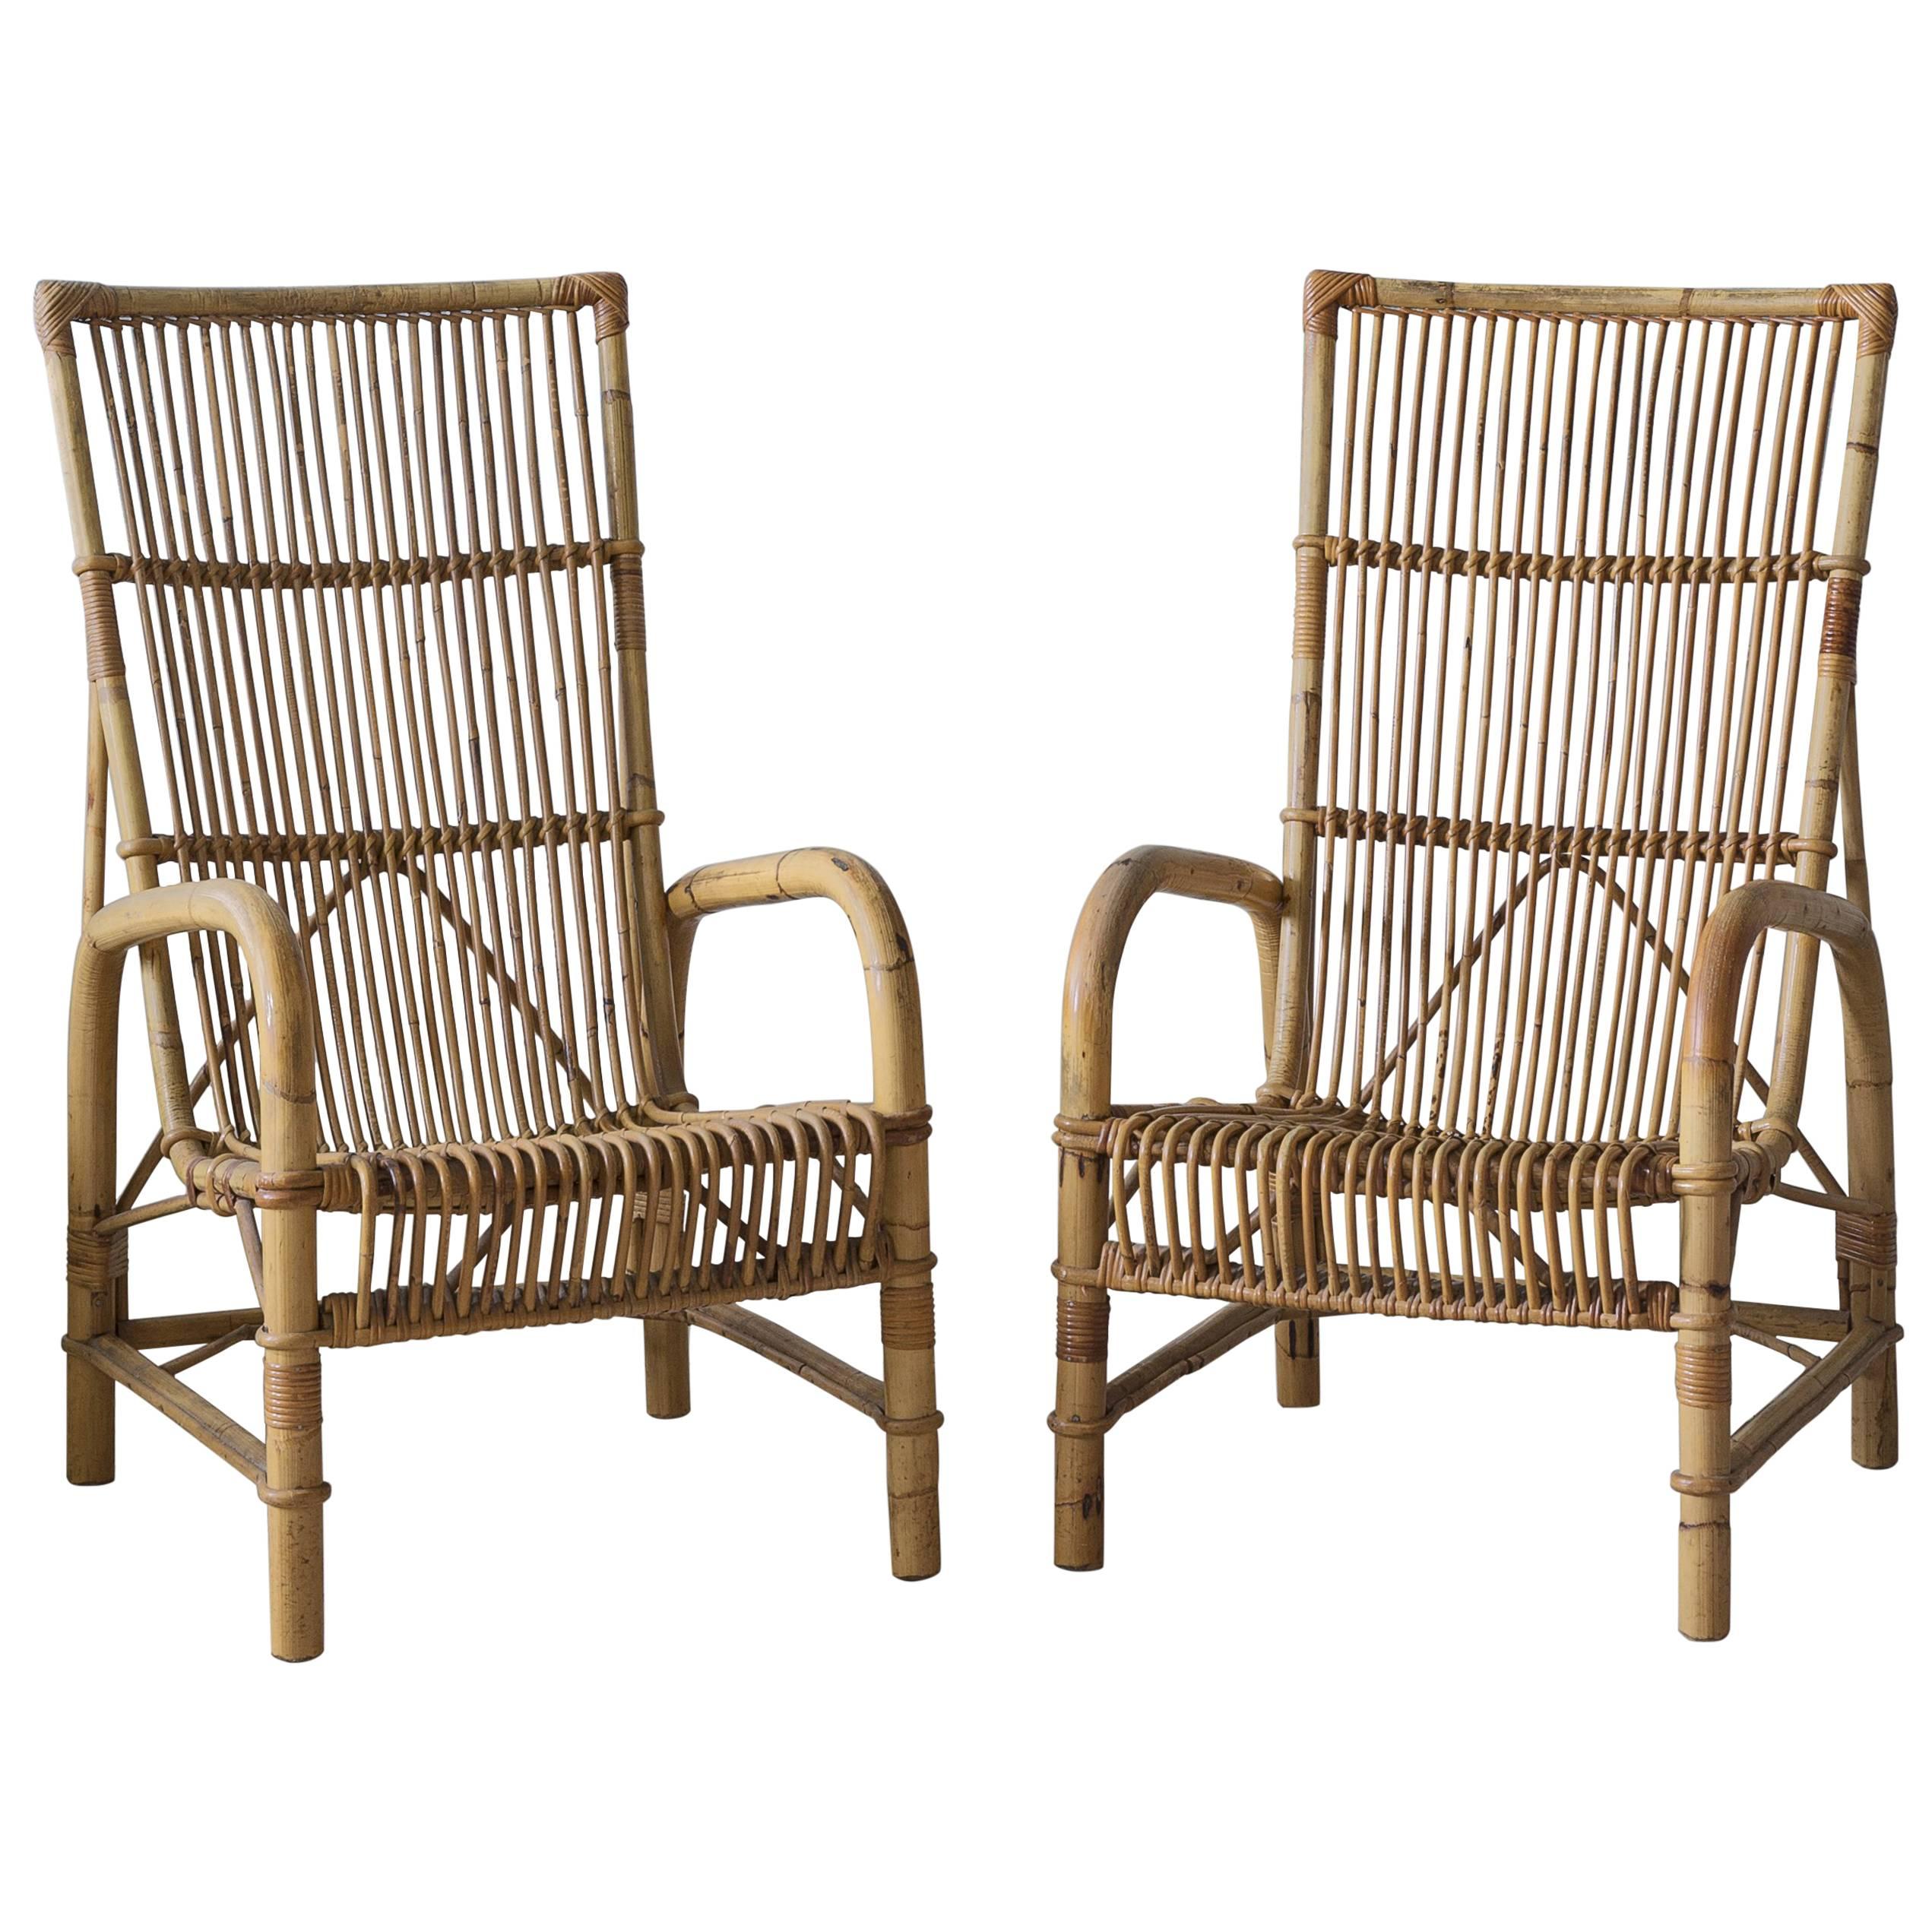 Pair of Vintage 1950s Wicker Chairs